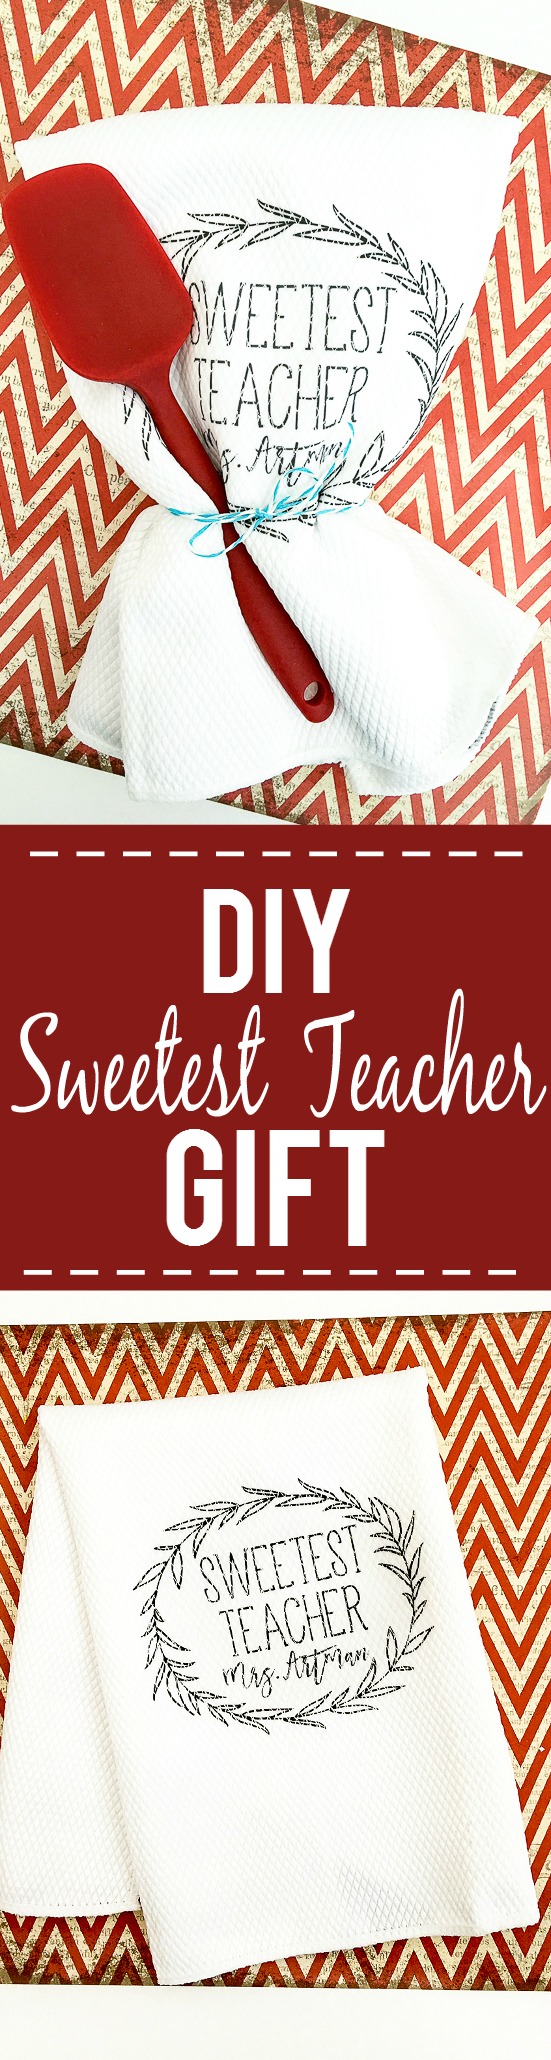 DIY Sweetest Teacher Gift idea - Thank your favorite teacher with this easy, cute, and frugal DIY Sweetest Teacher Gift idea that's simple to make and sure to make her smile! Easy and cheap DIY teacher gift idea